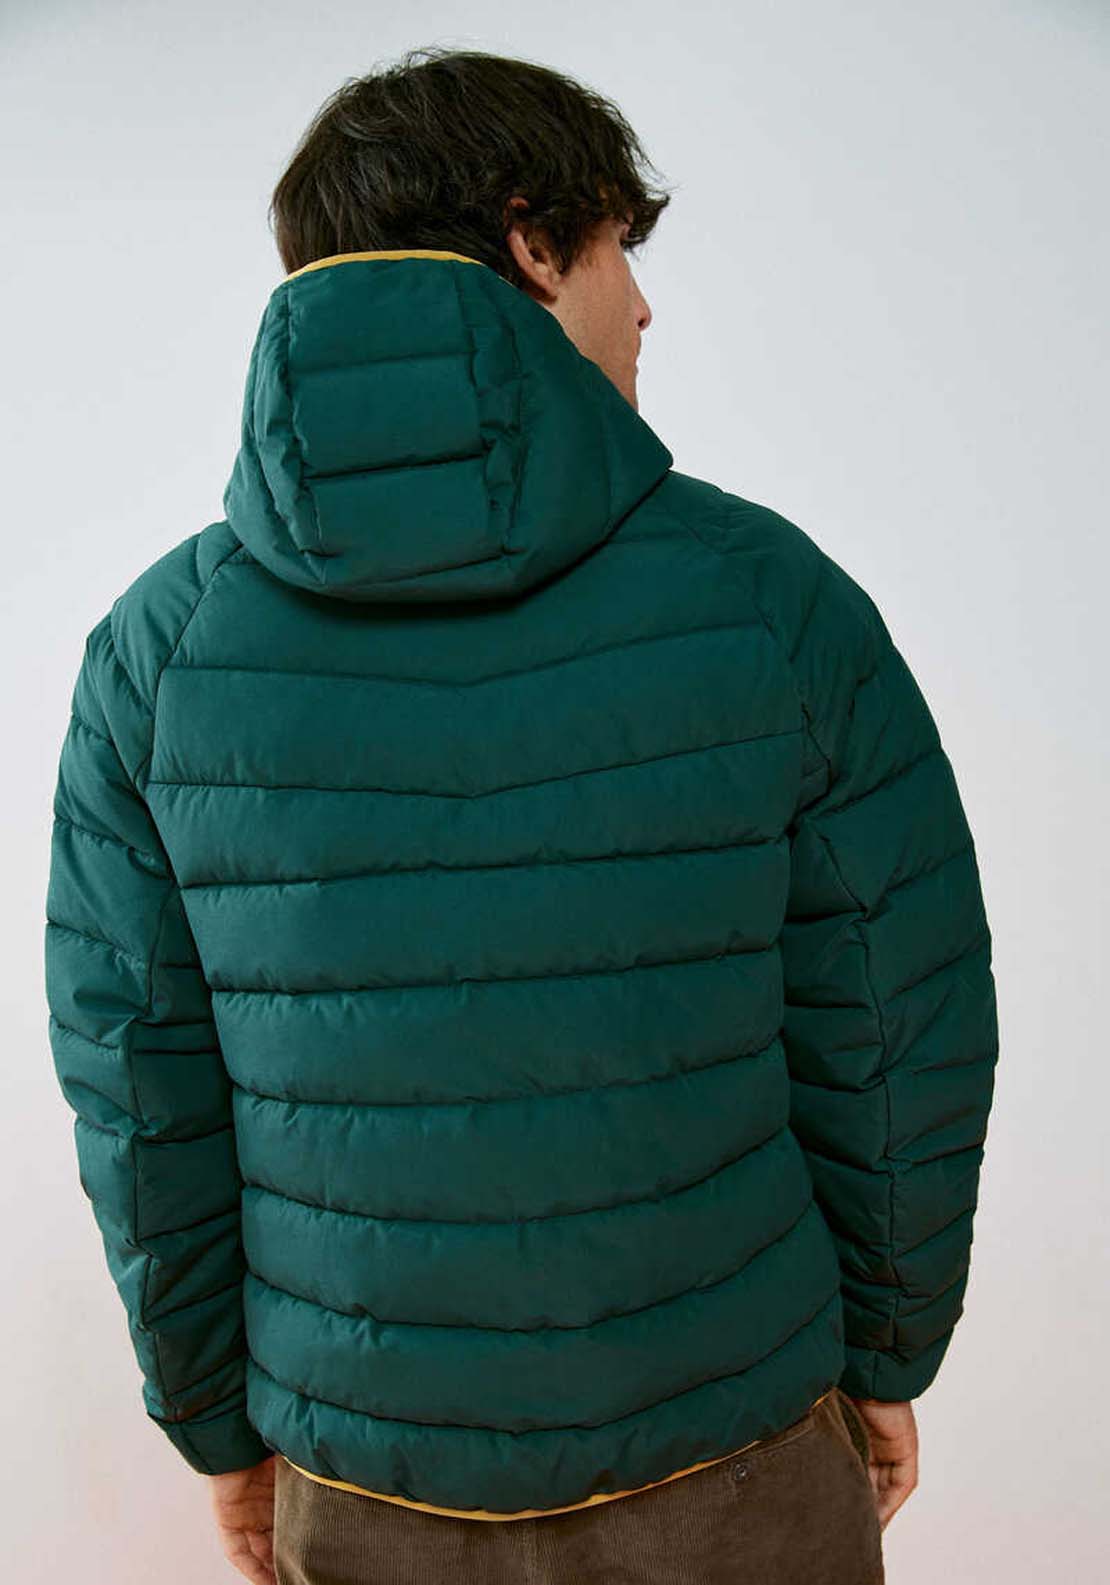 Springfield Padded thermal jacket-Teal - Blue 4 Shaws Department Stores